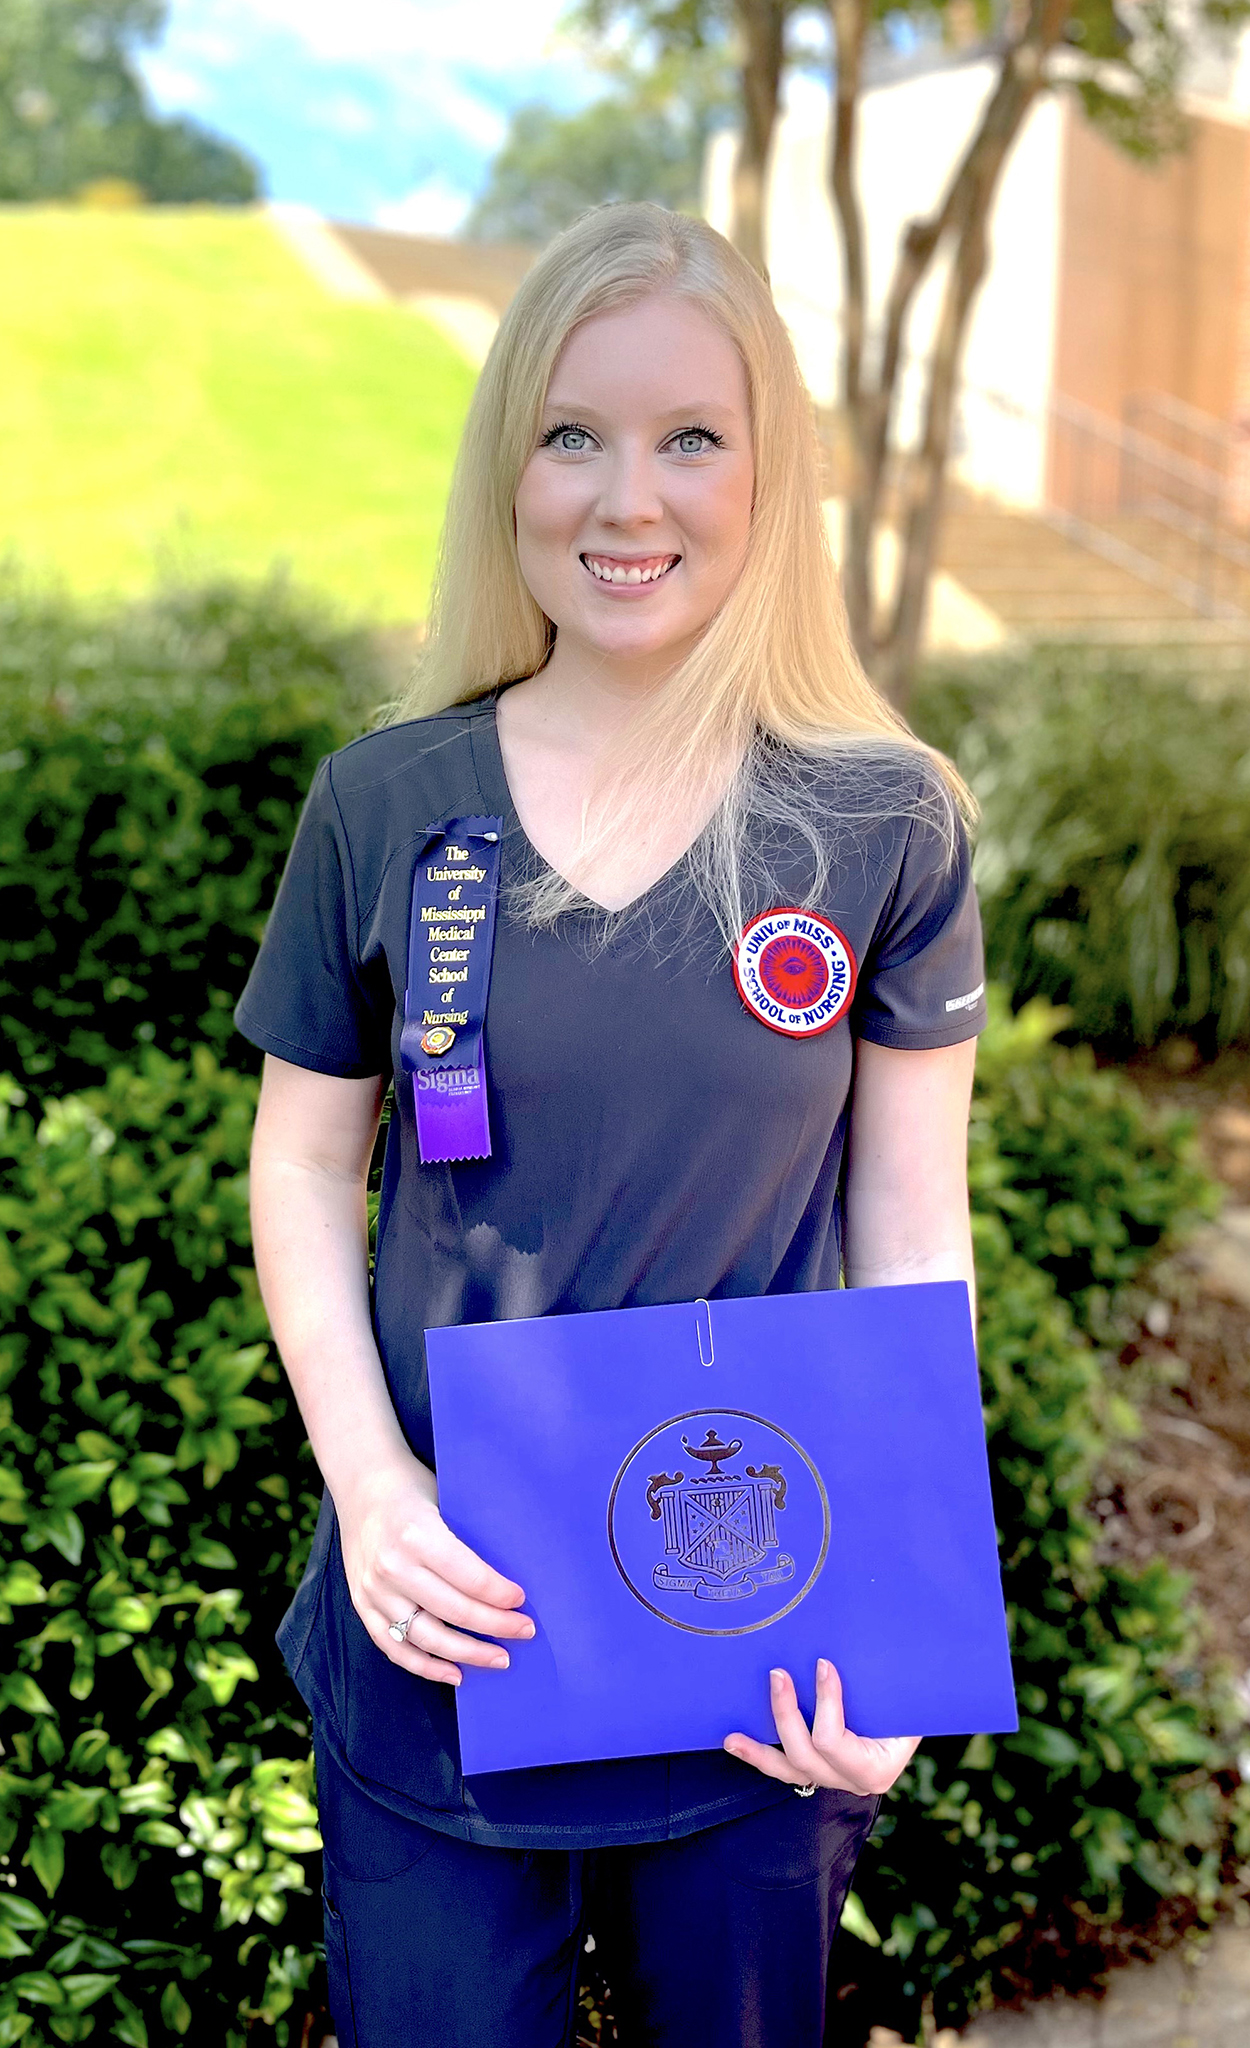 Kaylee Hillhouse, of Pontotoc, graduated recently with her bachelor’s degree in nursing through the accelerated one-year program offered by the UM Medical Center. She also completed a Bachelor of Allied Health Studies at Ole Miss. Submitted photo